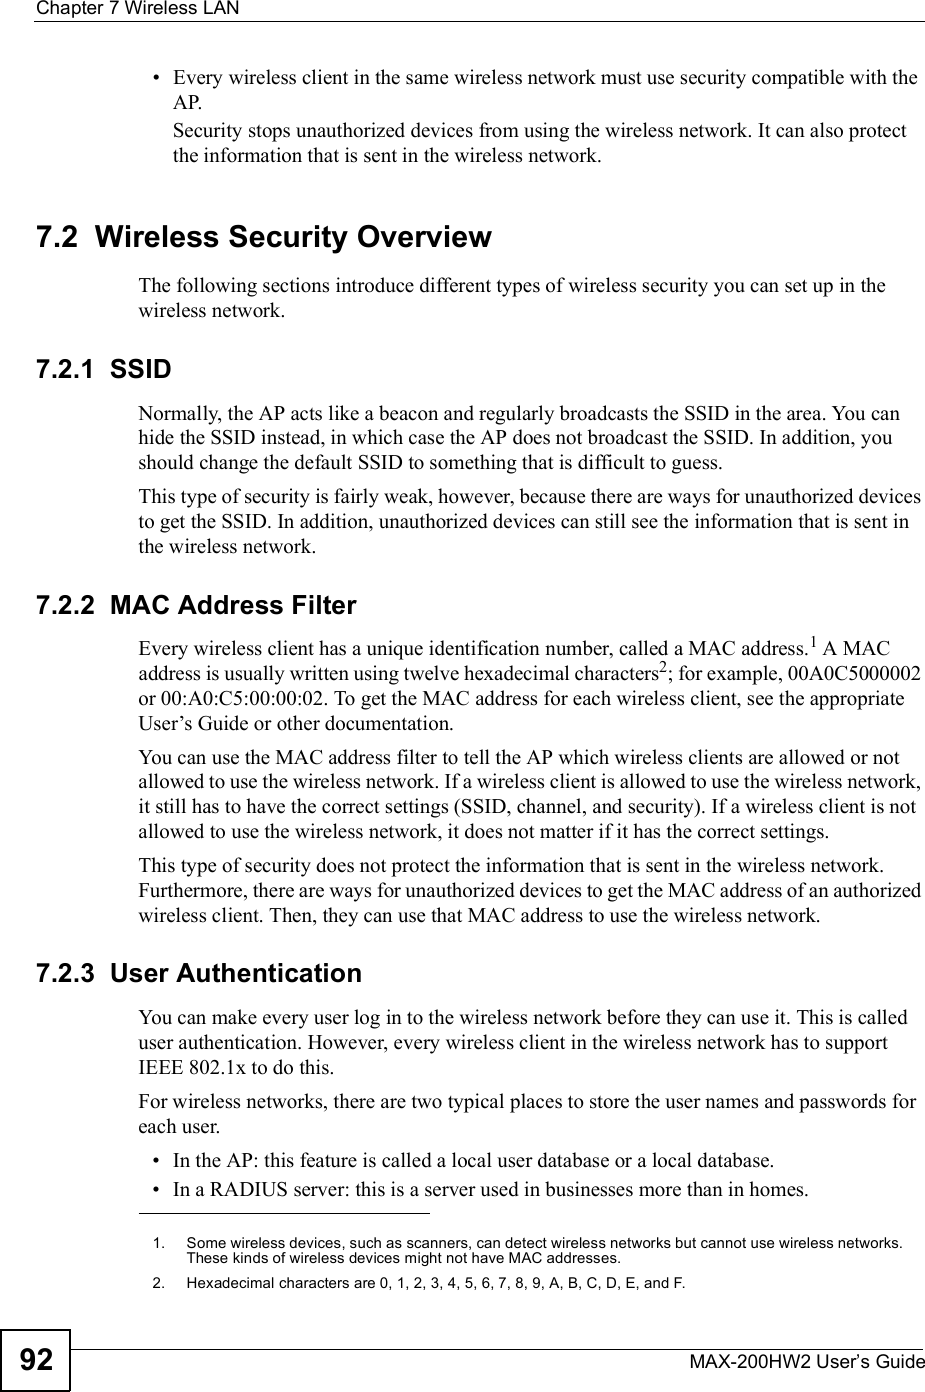 Chapter 7Wireless LANMAX-200HW2 User s Guide92 Every wireless client in the same wireless network must use security compatible with the AP.Security stops unauthorized devices from using the wireless network. It can also protect the information that is sent in the wireless network.7.2  Wireless Security OverviewThe following sections introduce different types of wireless security you can set up in the wireless network.7.2.1  SSIDNormally, the AP acts like a beacon and regularly broadcasts the SSID in the area. You can hide the SSID instead, in which case the AP does not broadcast the SSID. In addition, you should change the default SSID to something that is difficult to guess.This type of security is fairly weak, however, because there are ways for unauthorized devices to get the SSID. In addition, unauthorized devices can still see the information that is sent in the wireless network.7.2.2  MAC Address FilterEvery wireless client has a unique identification number, called a MAC address.1 A MAC address is usually written using twelve hexadecimal characters2; for example, 00A0C5000002 or 00:A0:C5:00:00:02. To get the MAC address for each wireless client, see the appropriate User!s Guide or other documentation.You can use the MAC address filter to tell the AP which wireless clients are allowed or not allowed to use the wireless network. If a wireless client is allowed to use the wireless network, it still has to have the correct settings (SSID, channel, and security). If a wireless client is not allowed to use the wireless network, it does not matter if it has the correct settings.This type of security does not protect the information that is sent in the wireless network. Furthermore, there are ways for unauthorized devices to get the MAC address of an authorized wireless client. Then, they can use that MAC address to use the wireless network.7.2.3  User AuthenticationYou can make every user log in to the wireless network before they can use it. This is called user authentication. However, every wireless client in the wireless network has to support IEEE 802.1x to do this.For wireless networks, there are two typical places to store the user names and passwords for each user. In the AP: this feature is called a local user database or a local database. In a RADIUS server: this is a server used in businesses more than in homes.1.Some wireless devices, such as scanners, can detect wireless networks but cannot use wireless networks. These kinds of wireless devices might not have MAC addresses.2.Hexadecimal characters are 0, 1, 2, 3, 4, 5, 6, 7, 8, 9, A, B, C, D, E, and F.